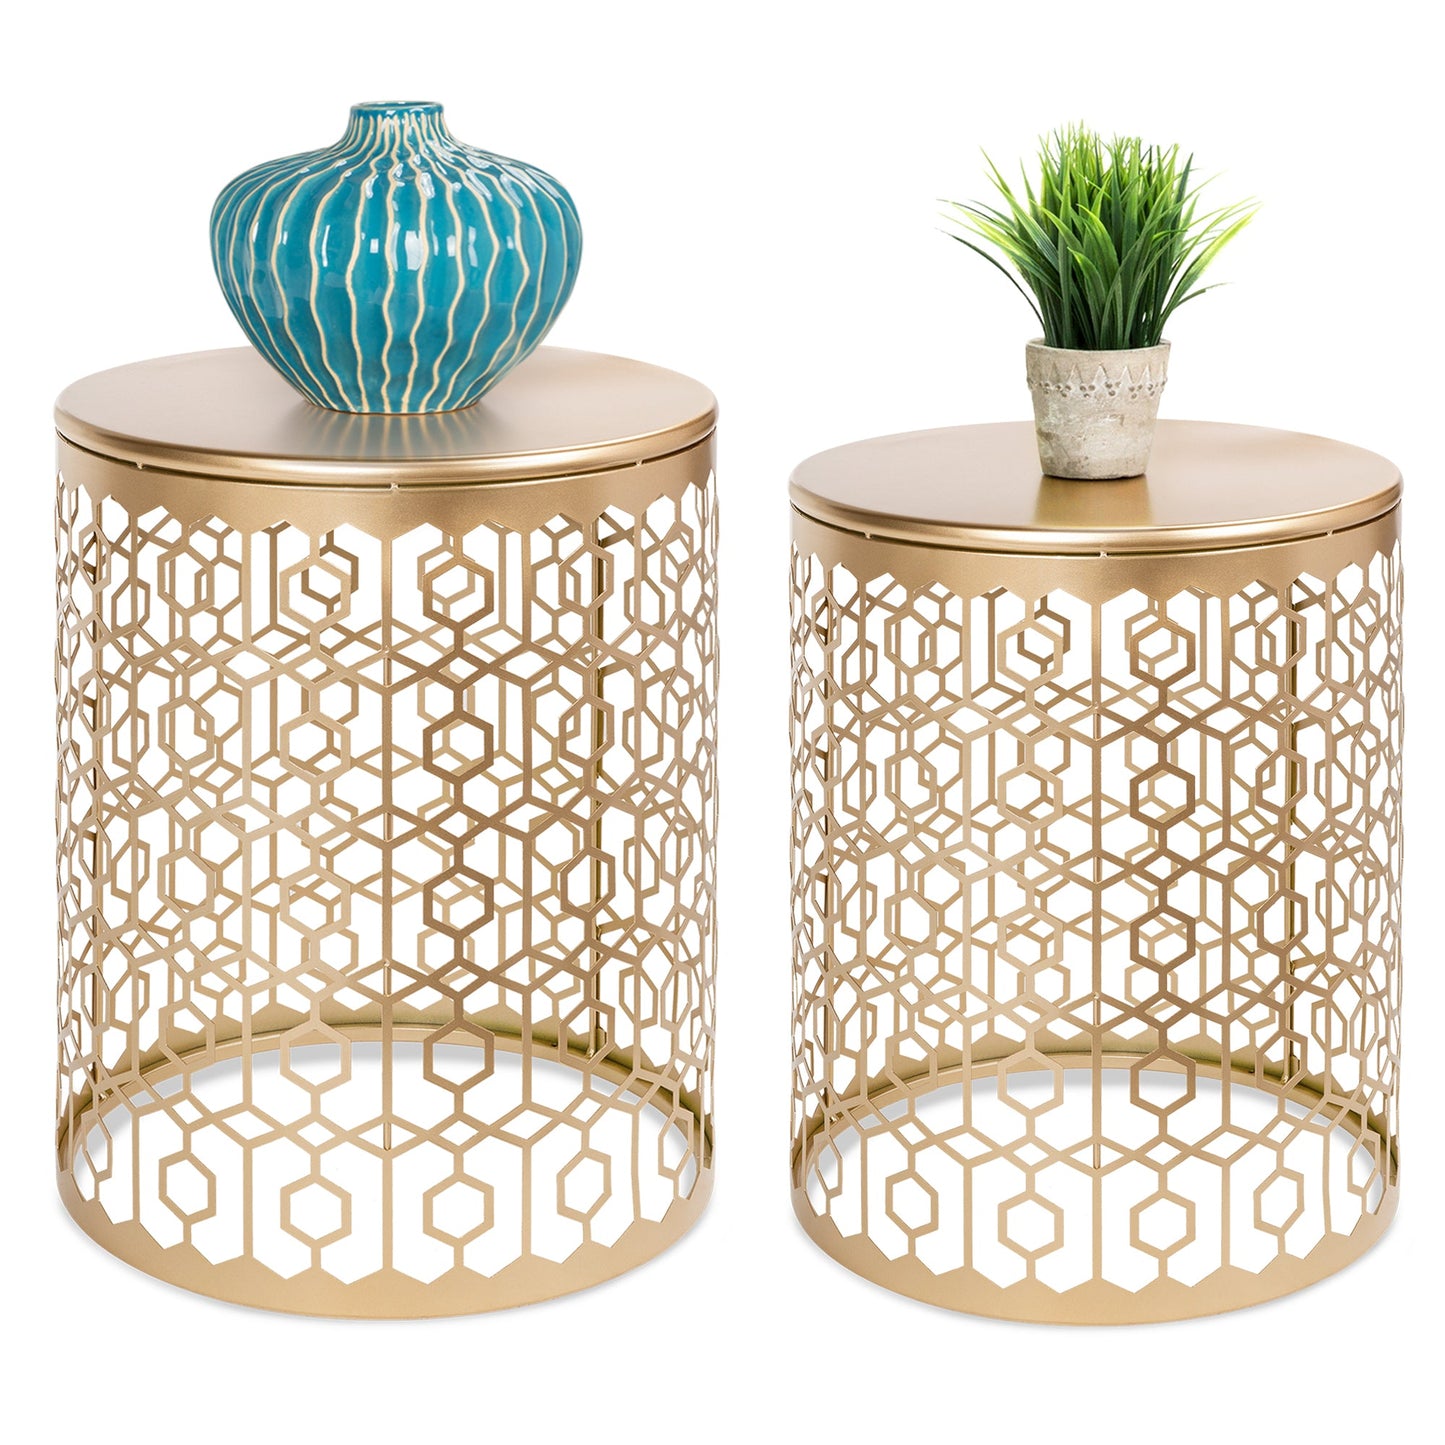 Set of 2 Decorative Round Side Accent Table Nightstands w/ Nesting Design